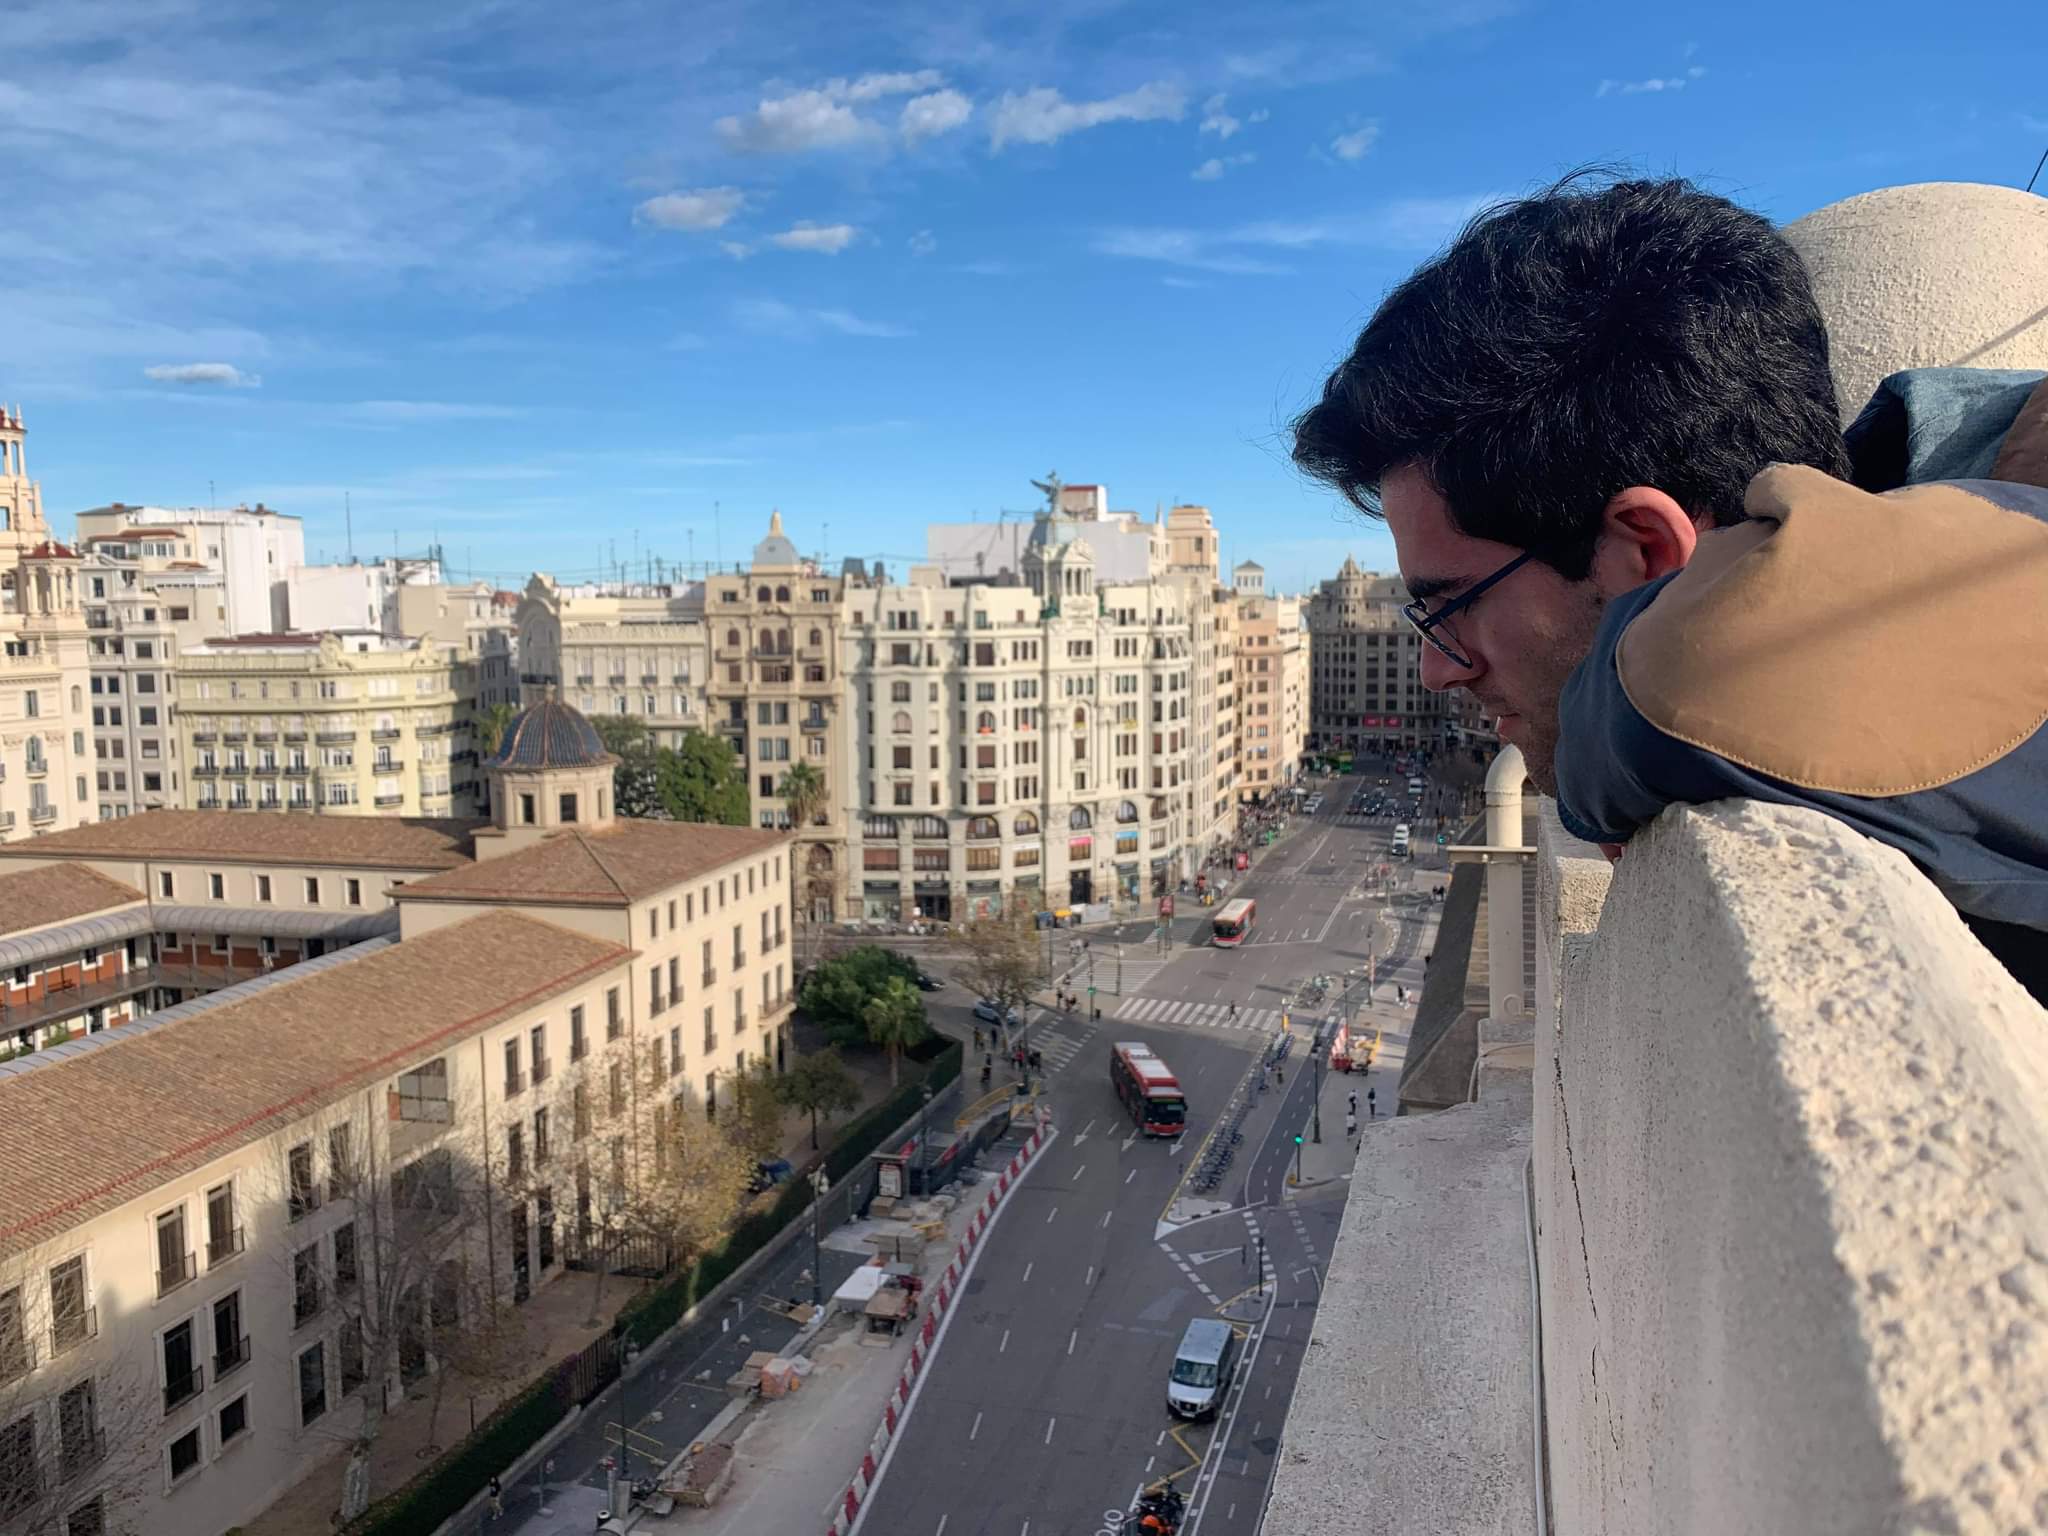 Kevin Mascitelli looking down at the street from the roof.